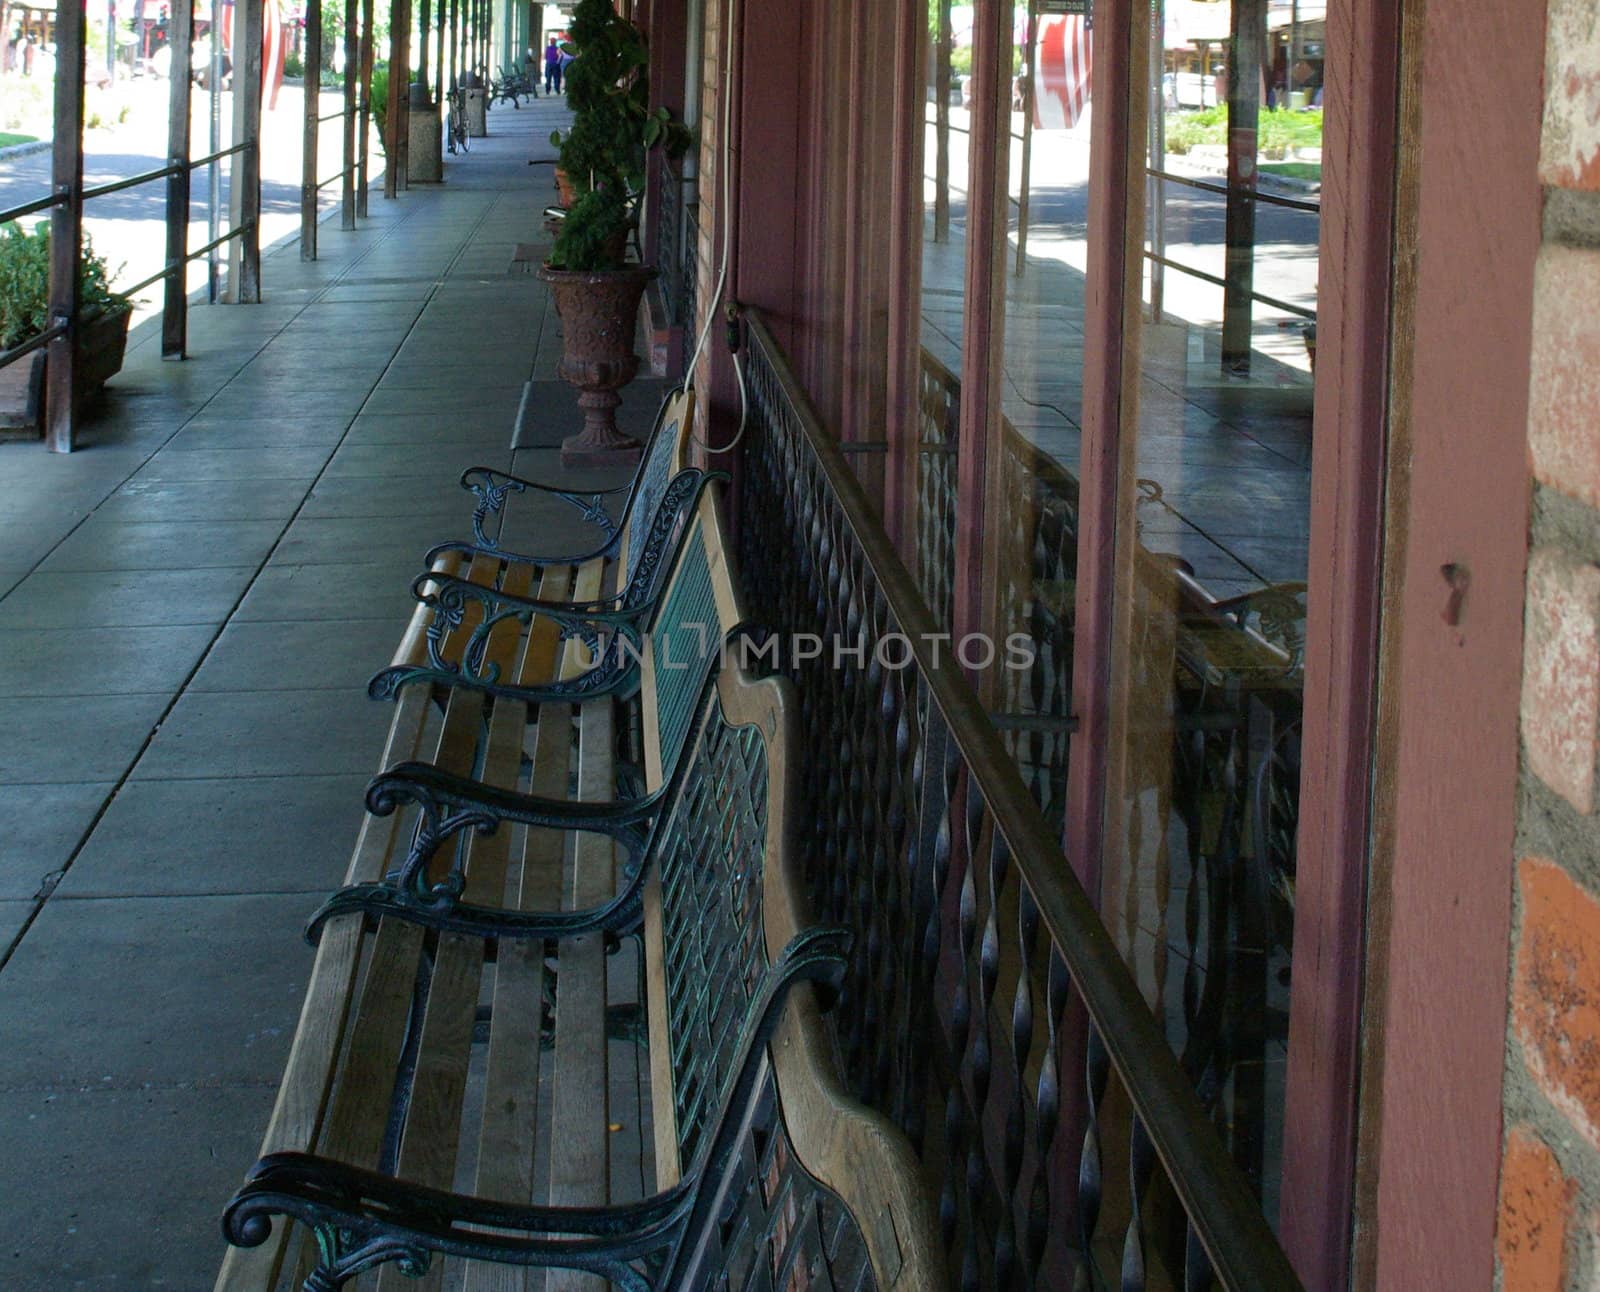 A covered walkway in front of local shops in a small town.